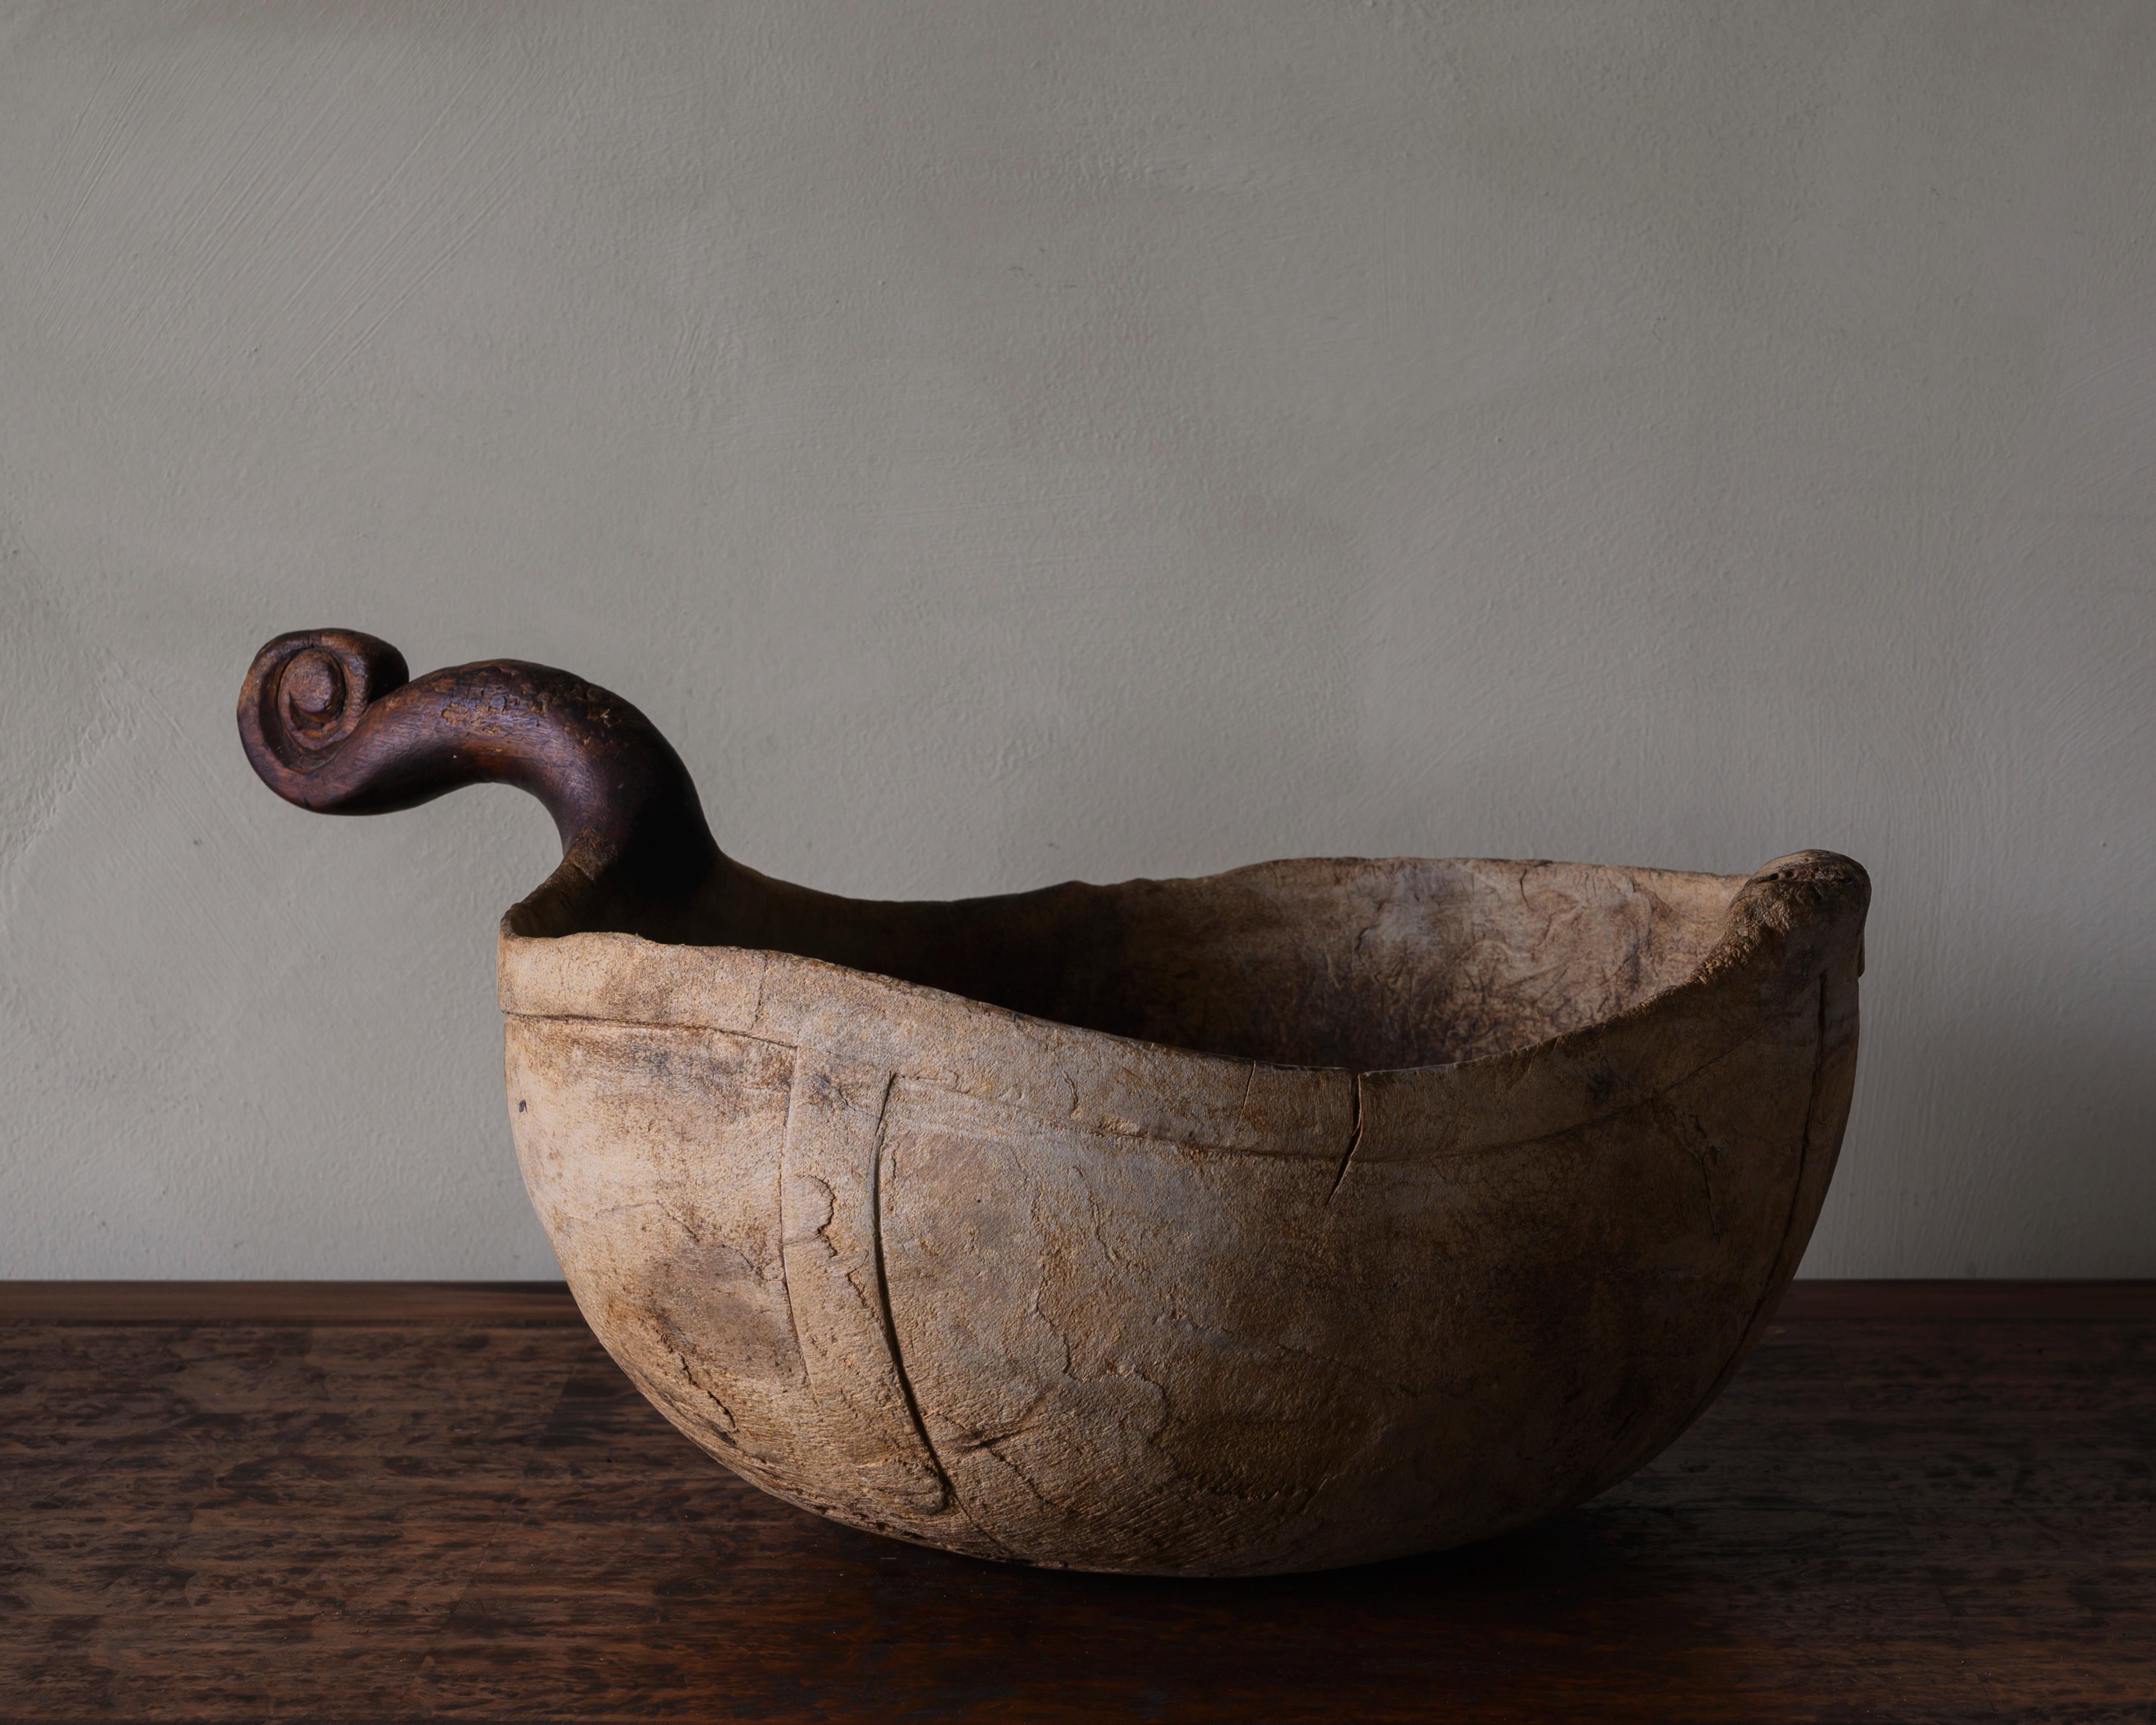 European Exceptional Swedish Early 18th Century Bowl / Ale Scoop